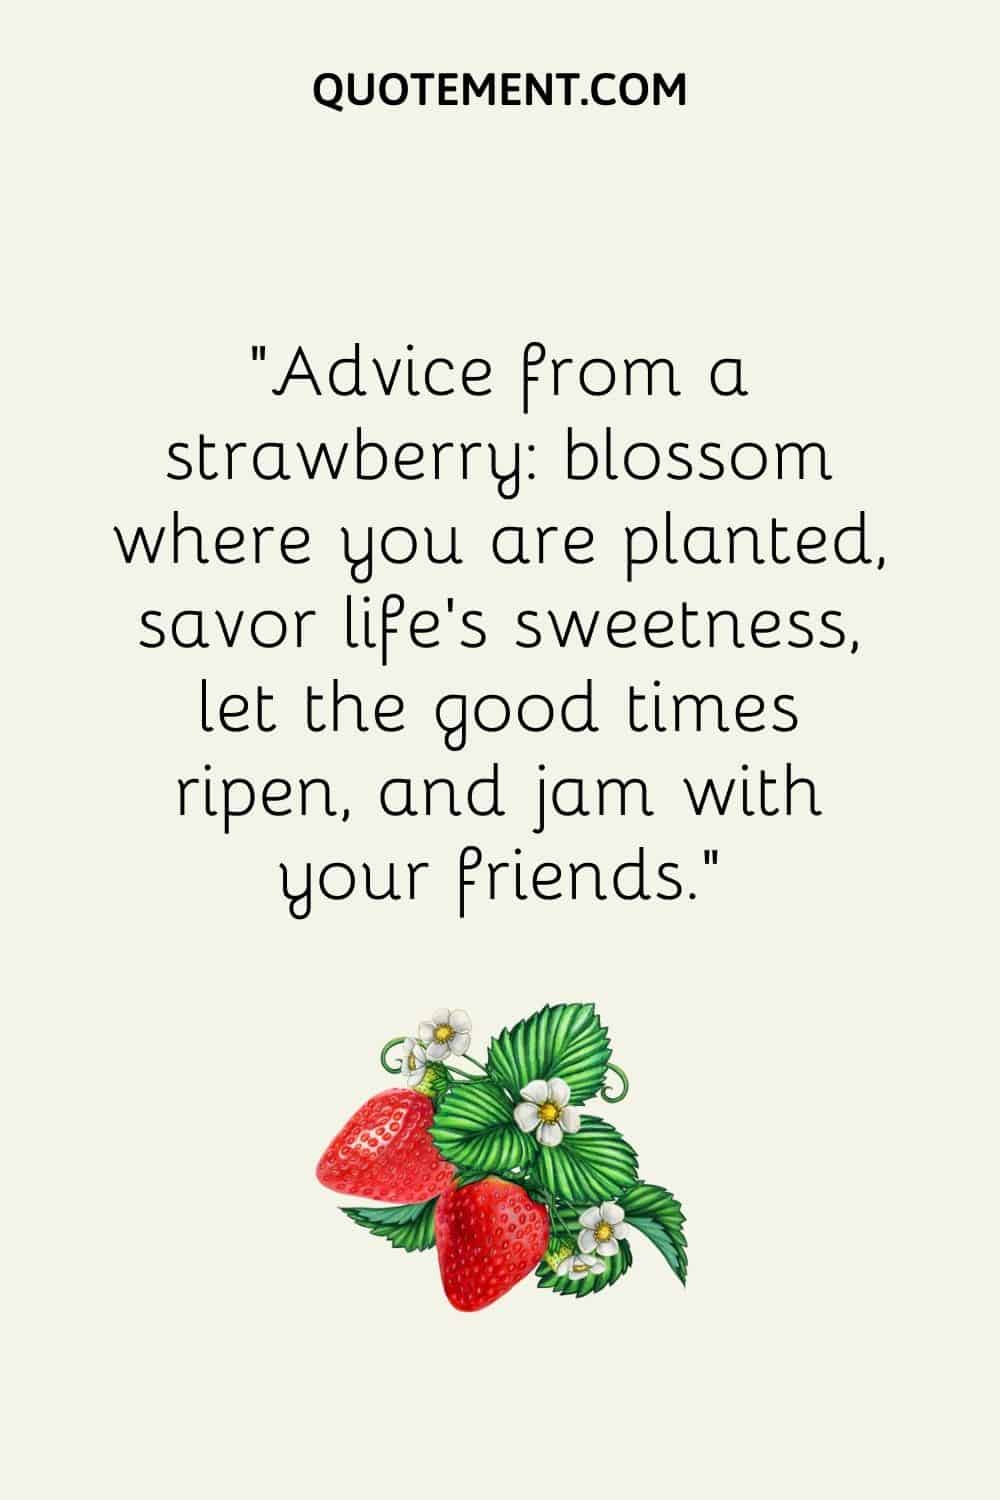 Advice from a strawberry blossom where you are planted, savor life’s sweetness, let the good times ripen, and jam with your friends